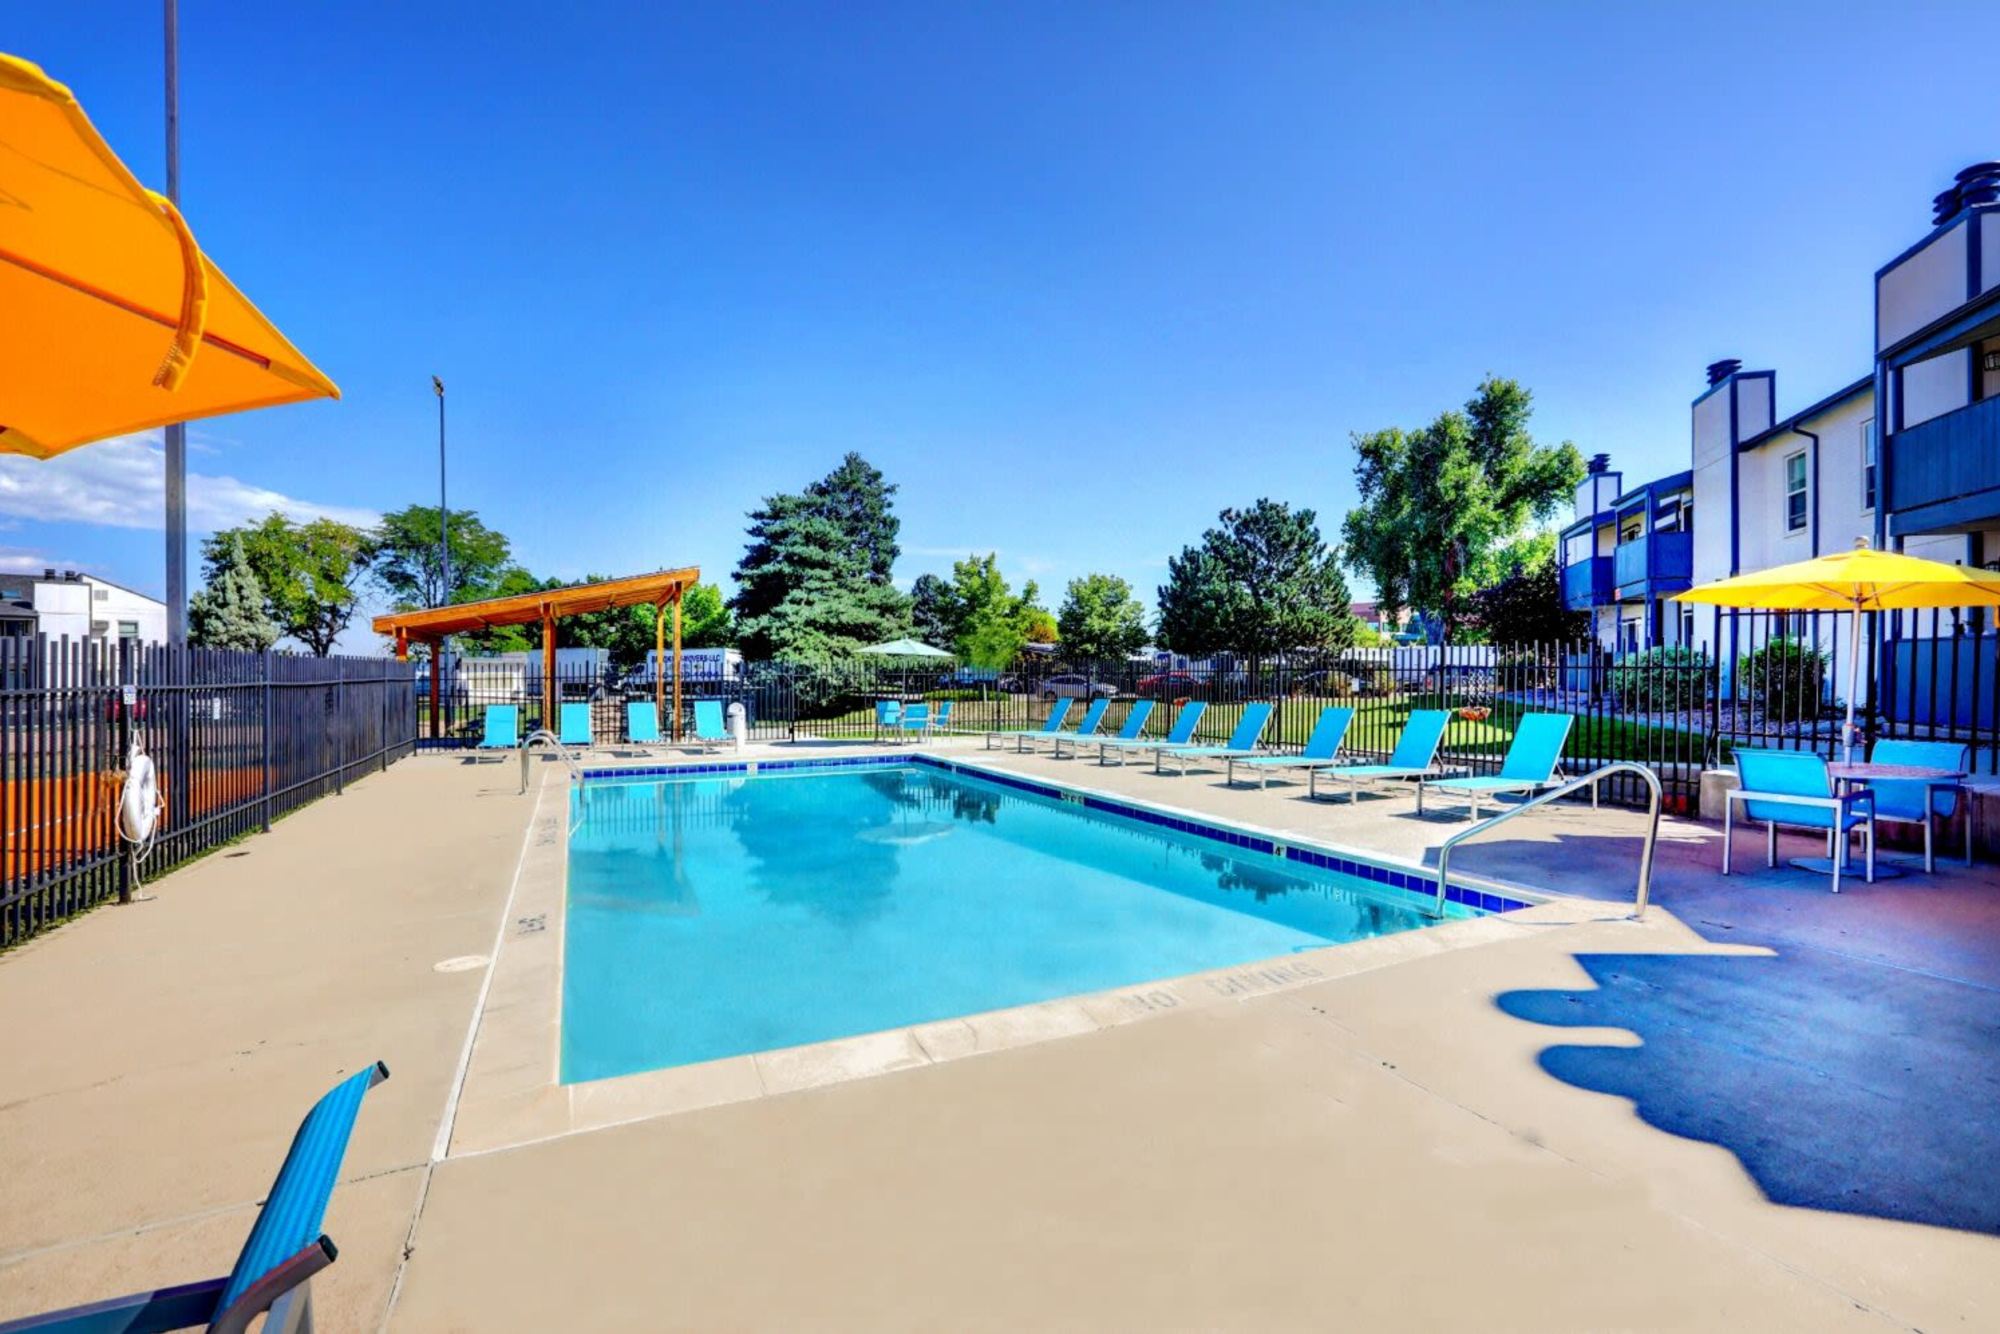 Pool with lounge chairs and umbrellas at Ascent at Lowry in Denver, Colorado